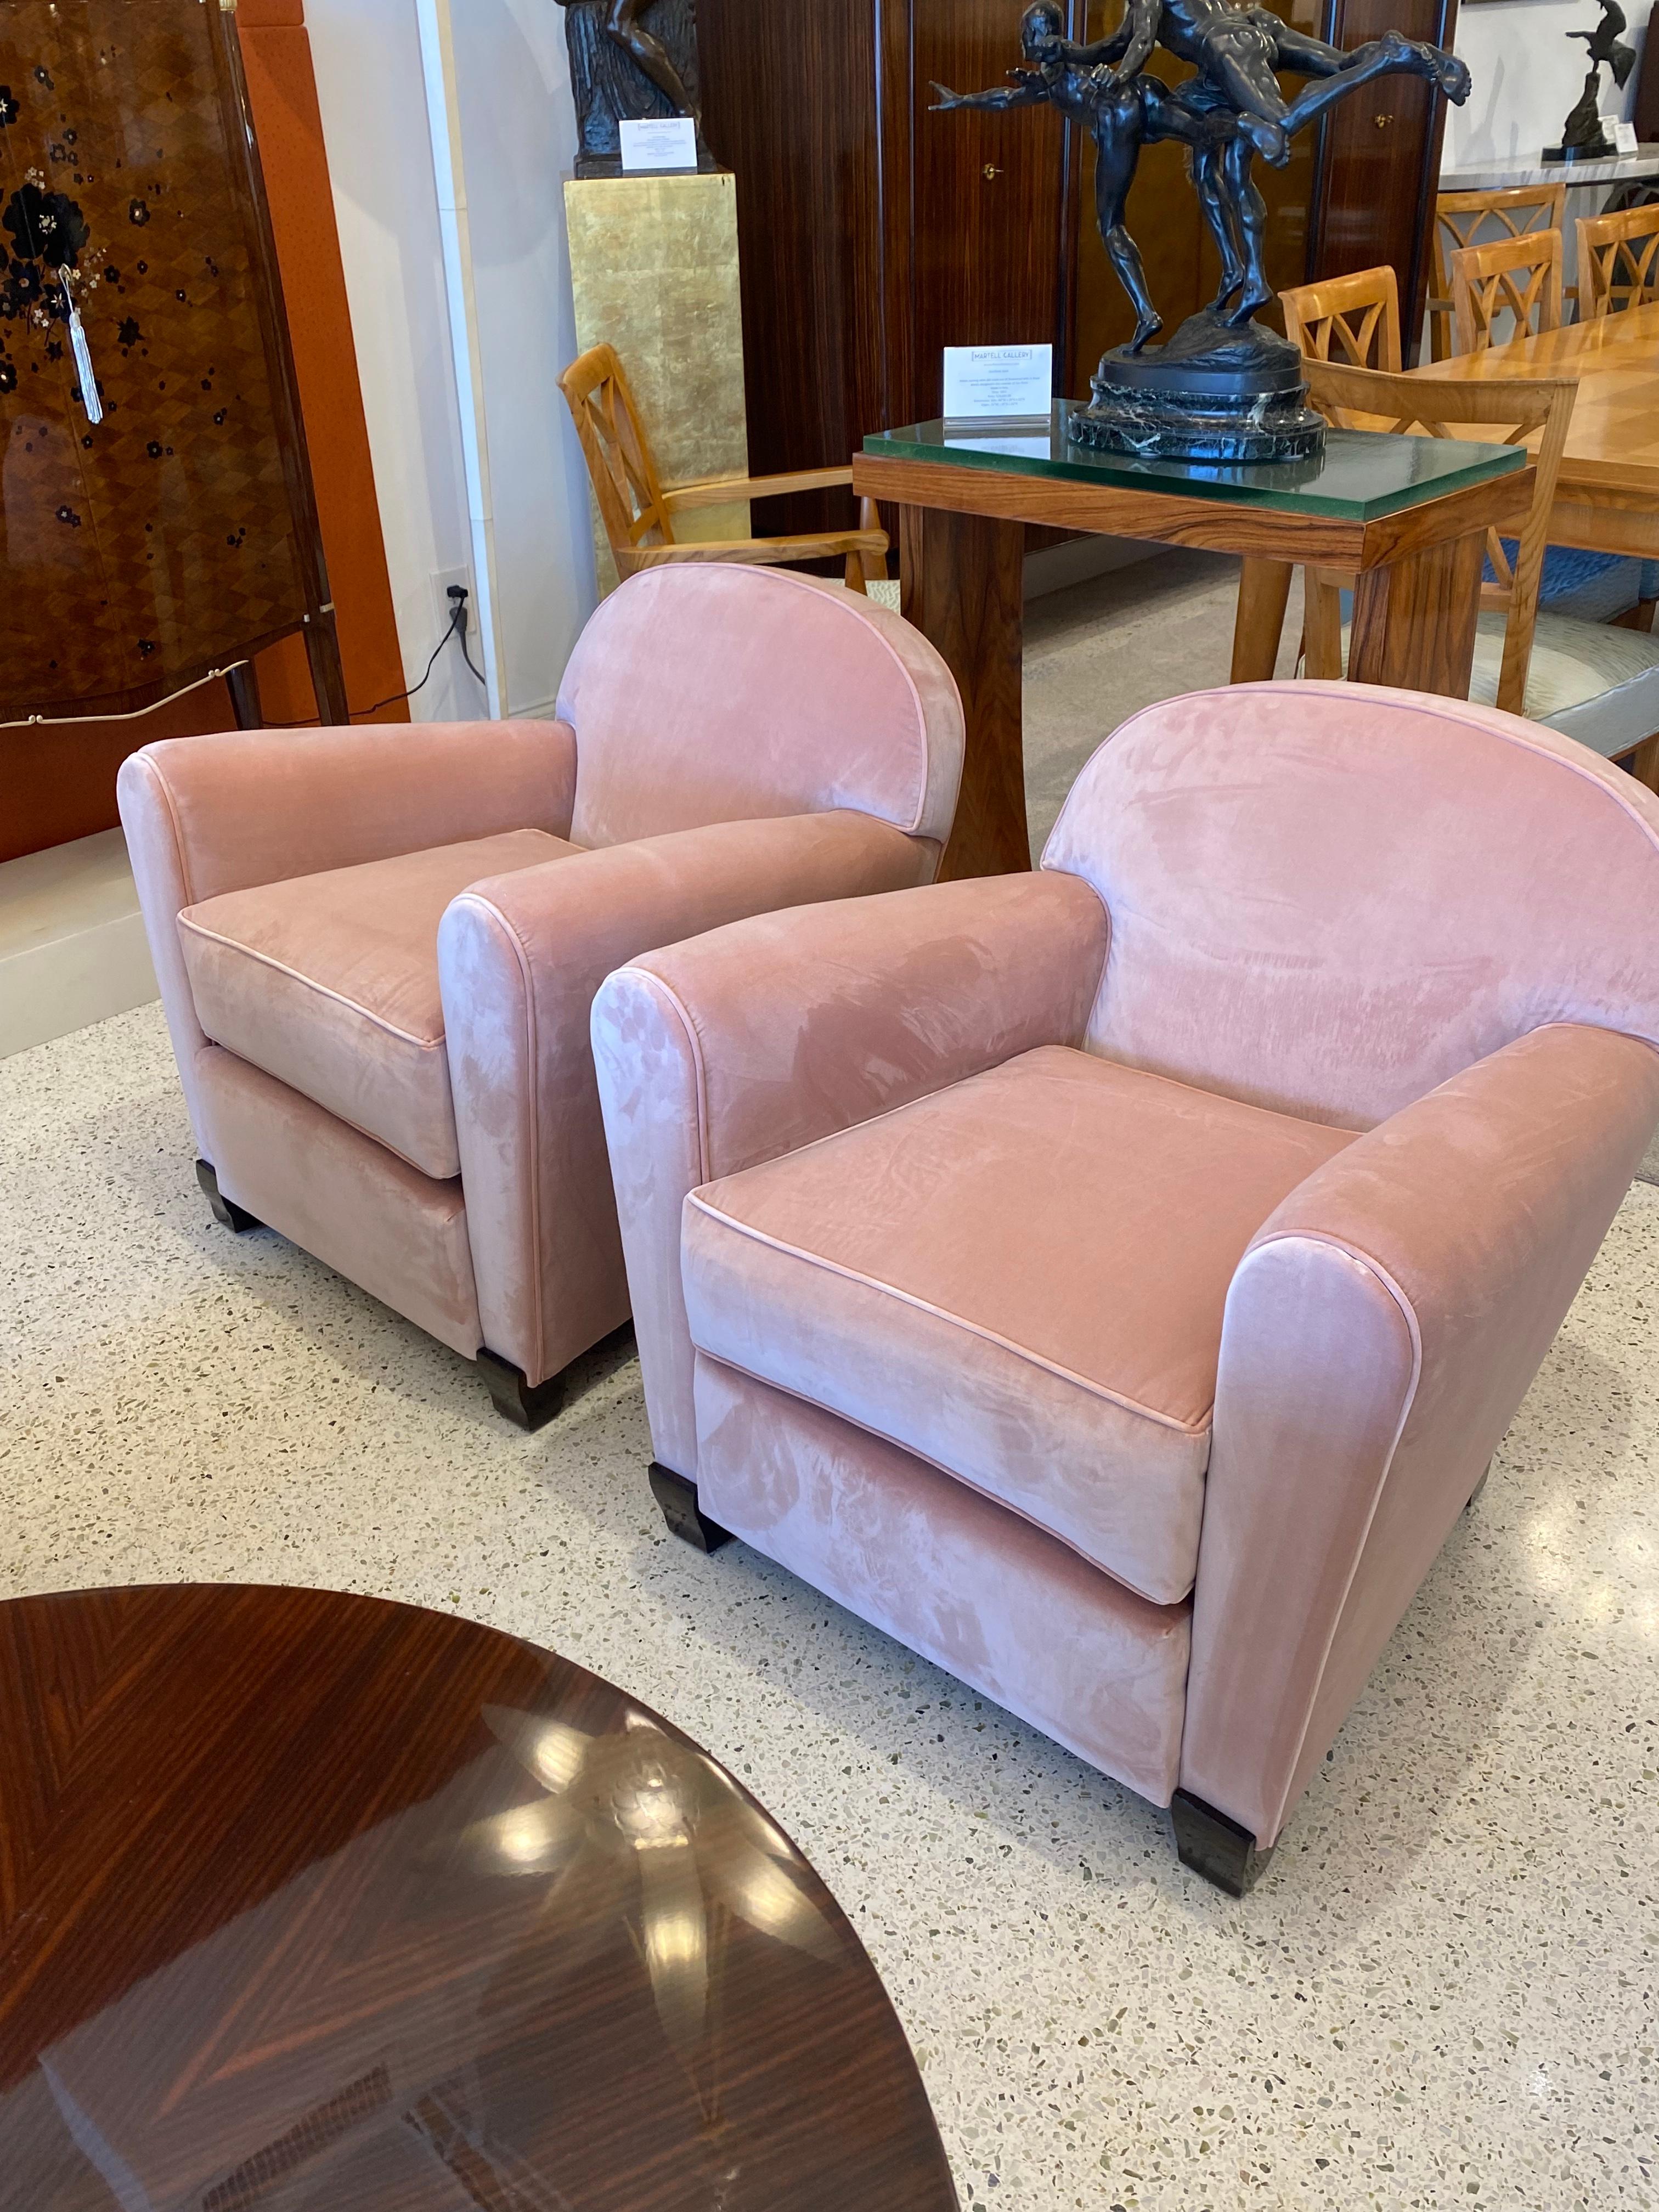 Pair of Club Chairs made out of a frame of solid Mahogany wood and upholstered in a Rosé color silk velvet.  These chairs were designed in France by Jules Leleu.
Reference: House of Leleu by Francoise Siriex, Page 73.

Jules Leleu was a prominent